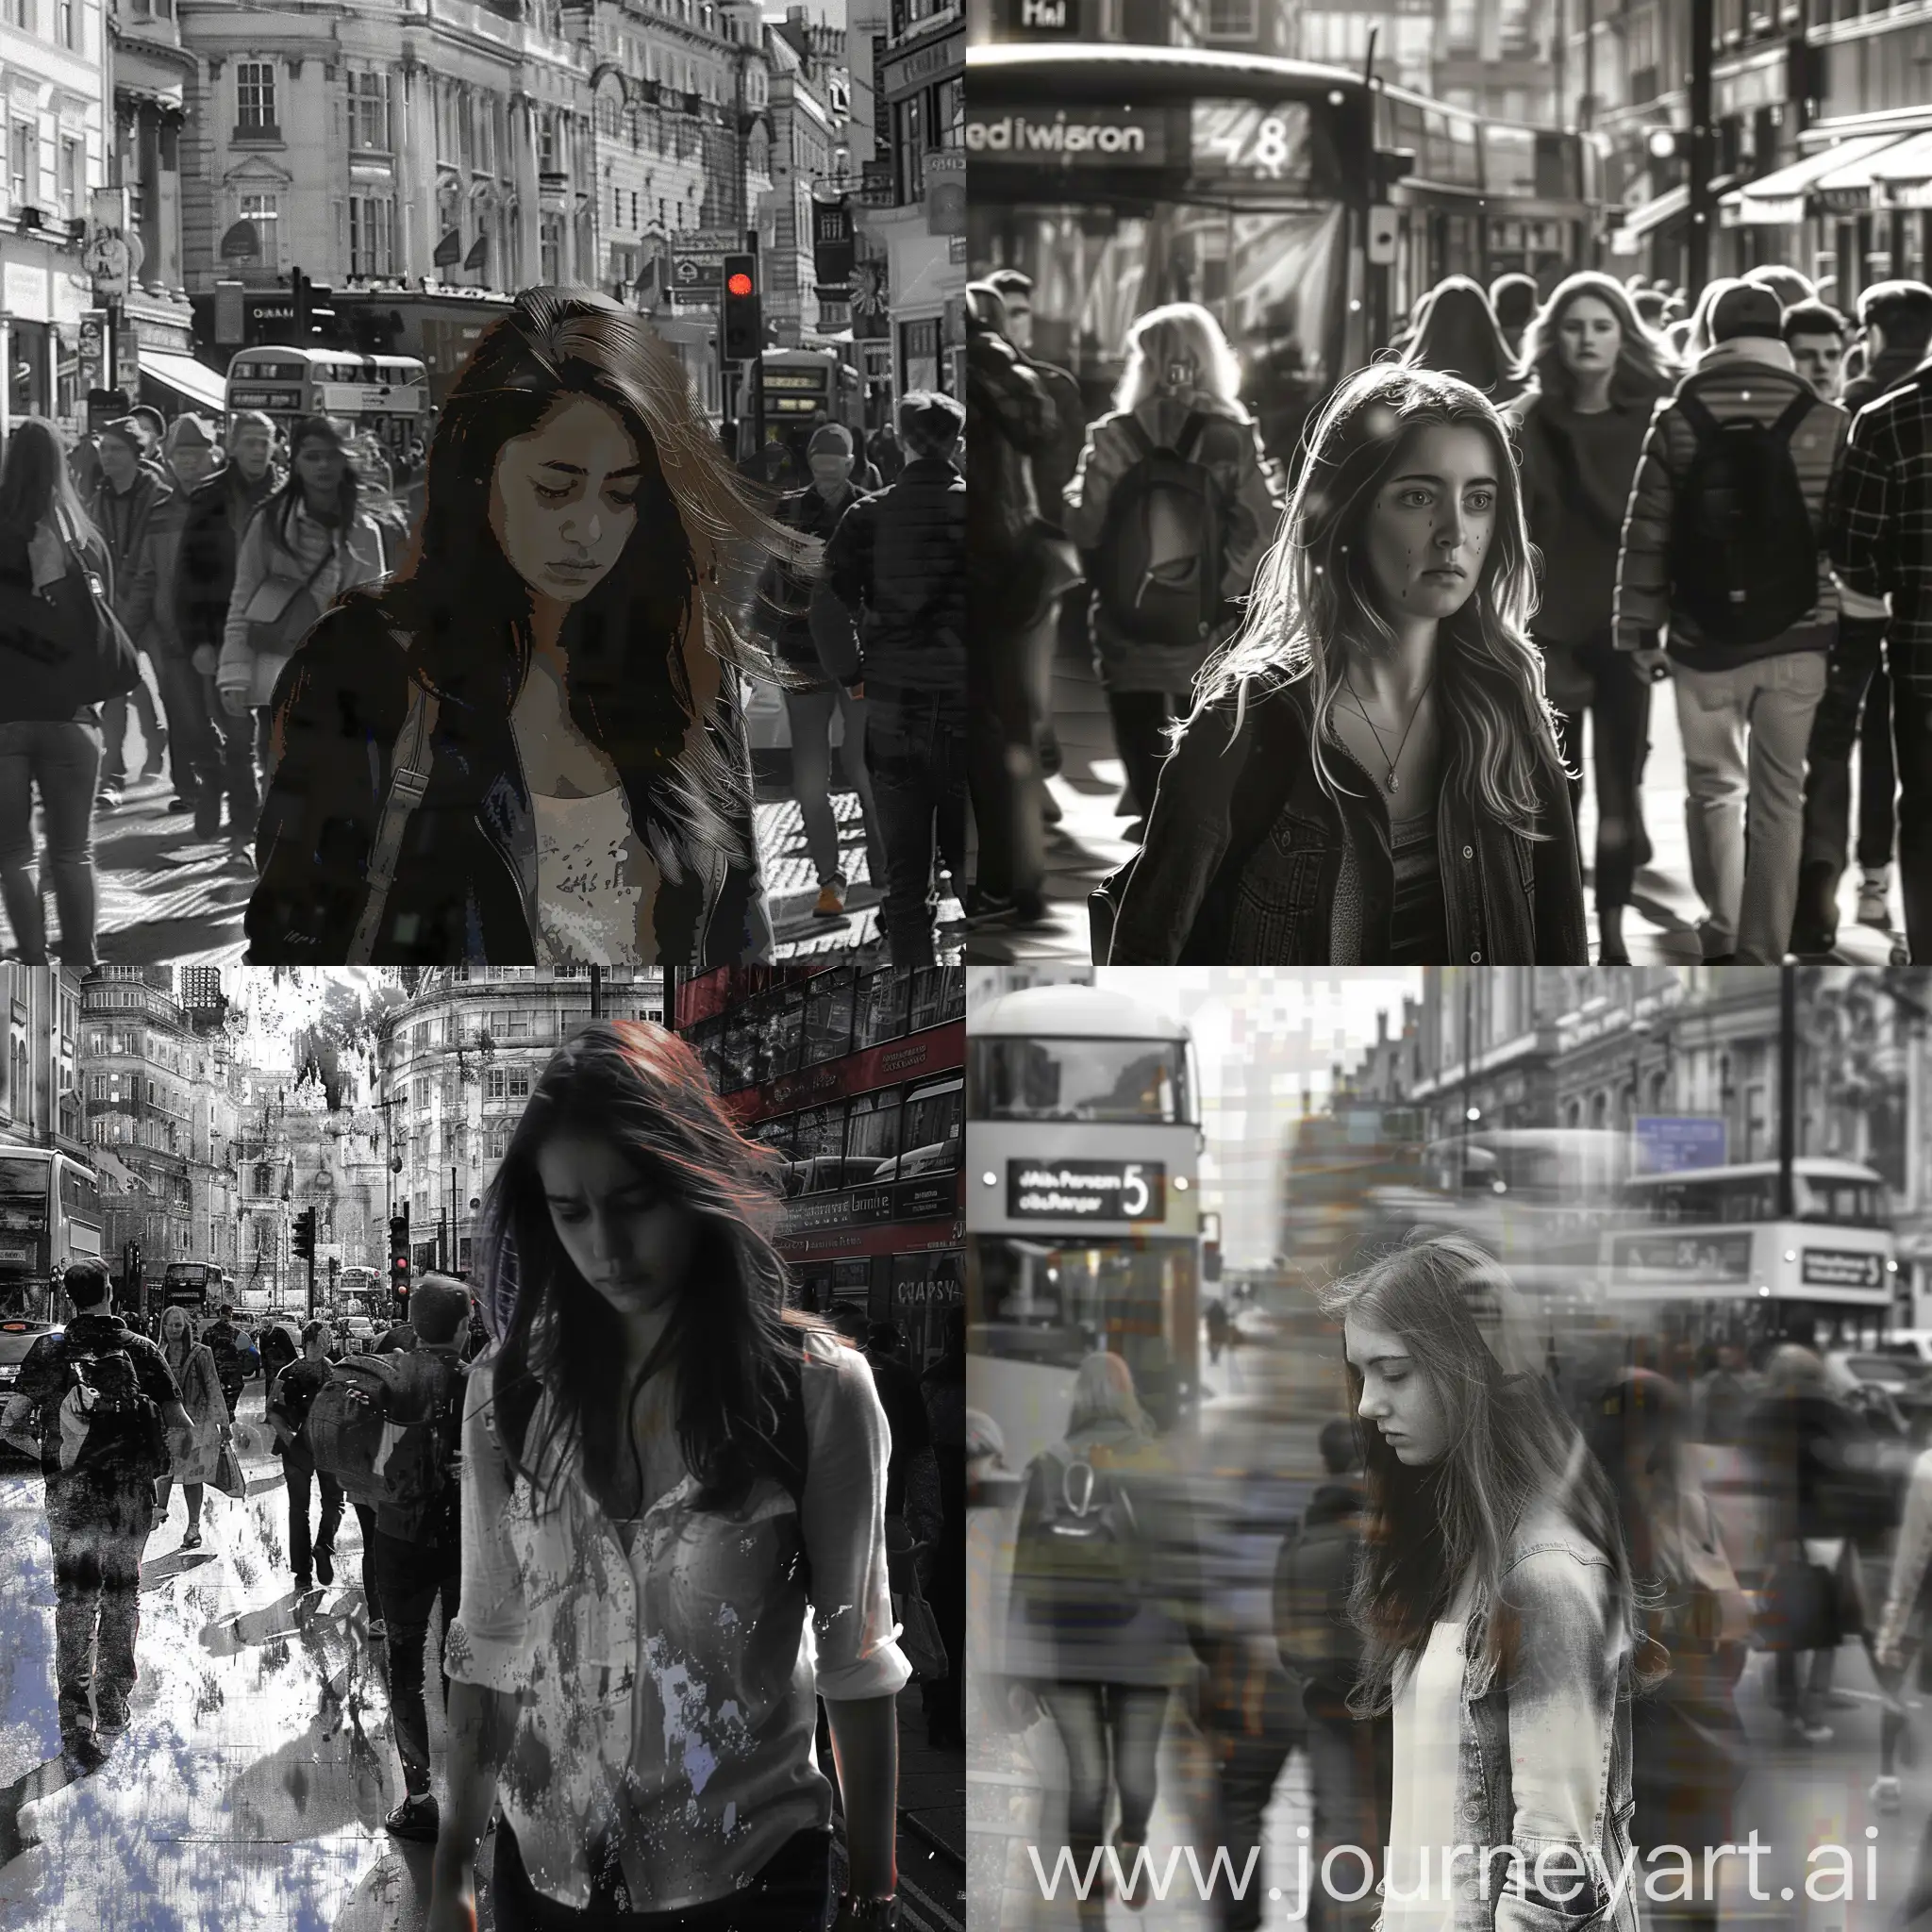 A highly detailed image of a beautiful sad young woman walking through a busy London street. She is in black and white but the rest of the image is in colour.